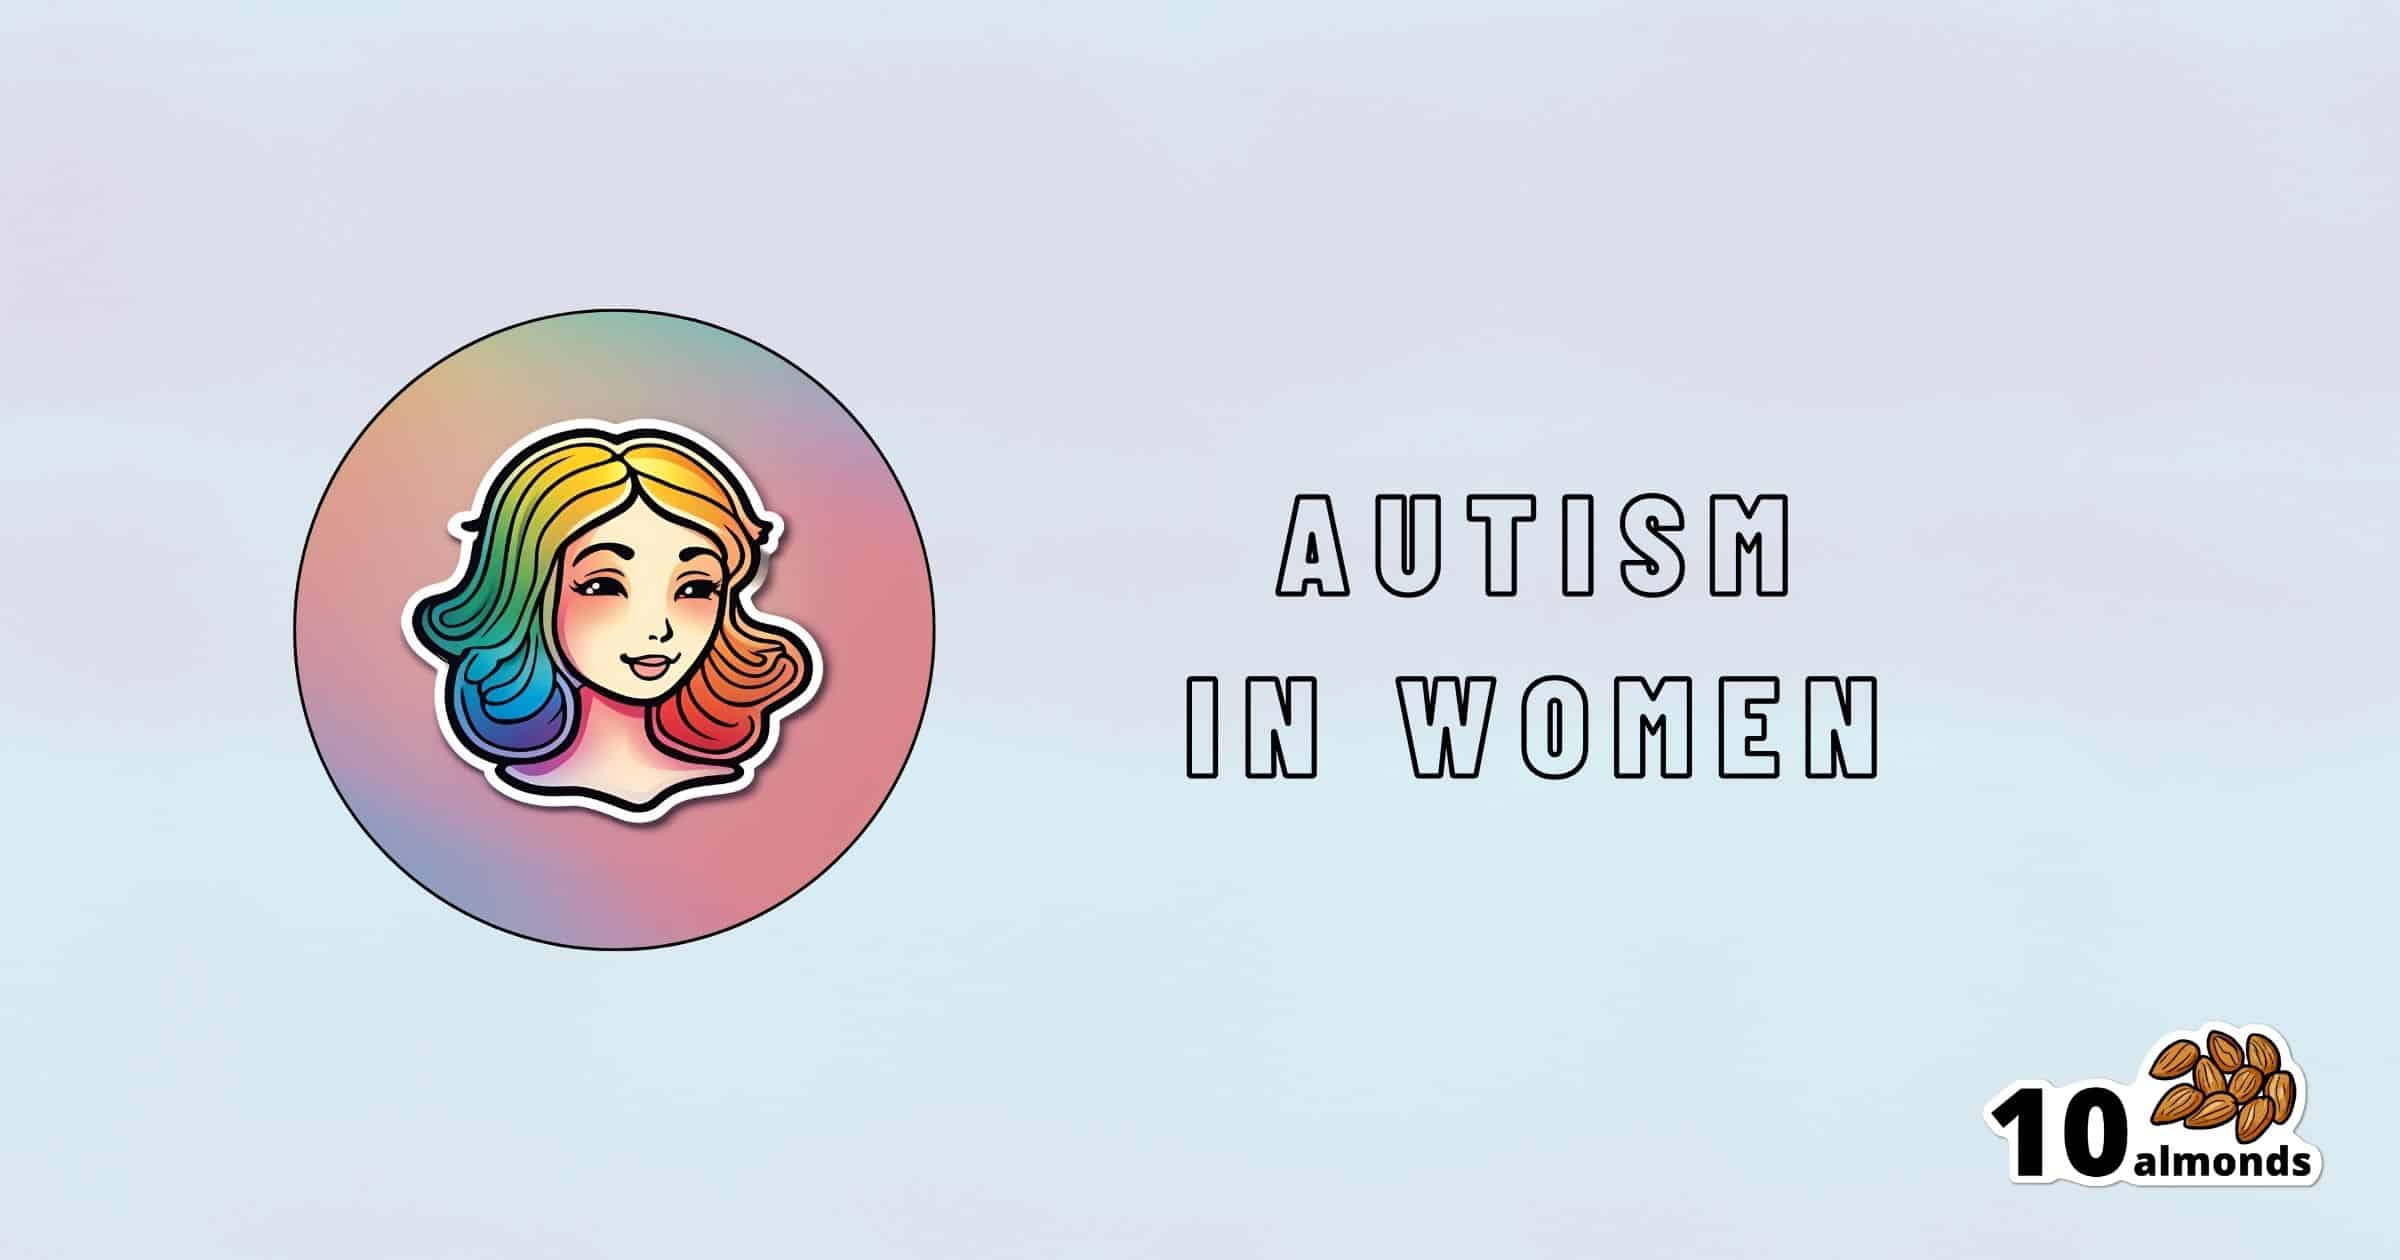 A circular illustration of a woman's face with rainbow-colored hair appears on the left against a light background. The text "Autism in Women: Overlooked Autistic Traits" is on the right. The logo "10 almonds" with an image of ten almonds is in the bottom right corner.